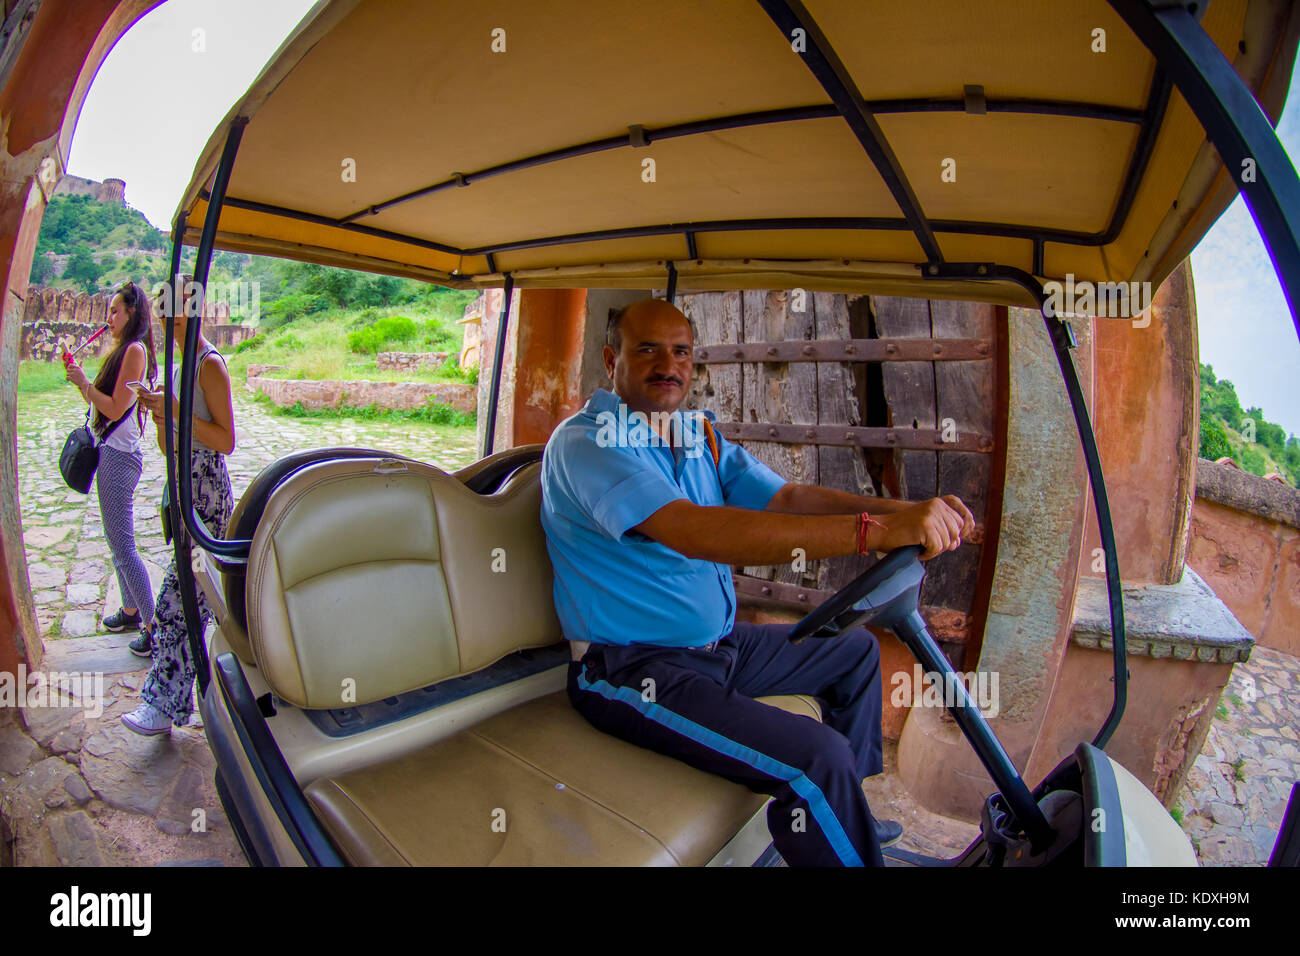 Amer, India - September 21, 2017: A driver in an empty rickshaw in Jaipur Stock Photo